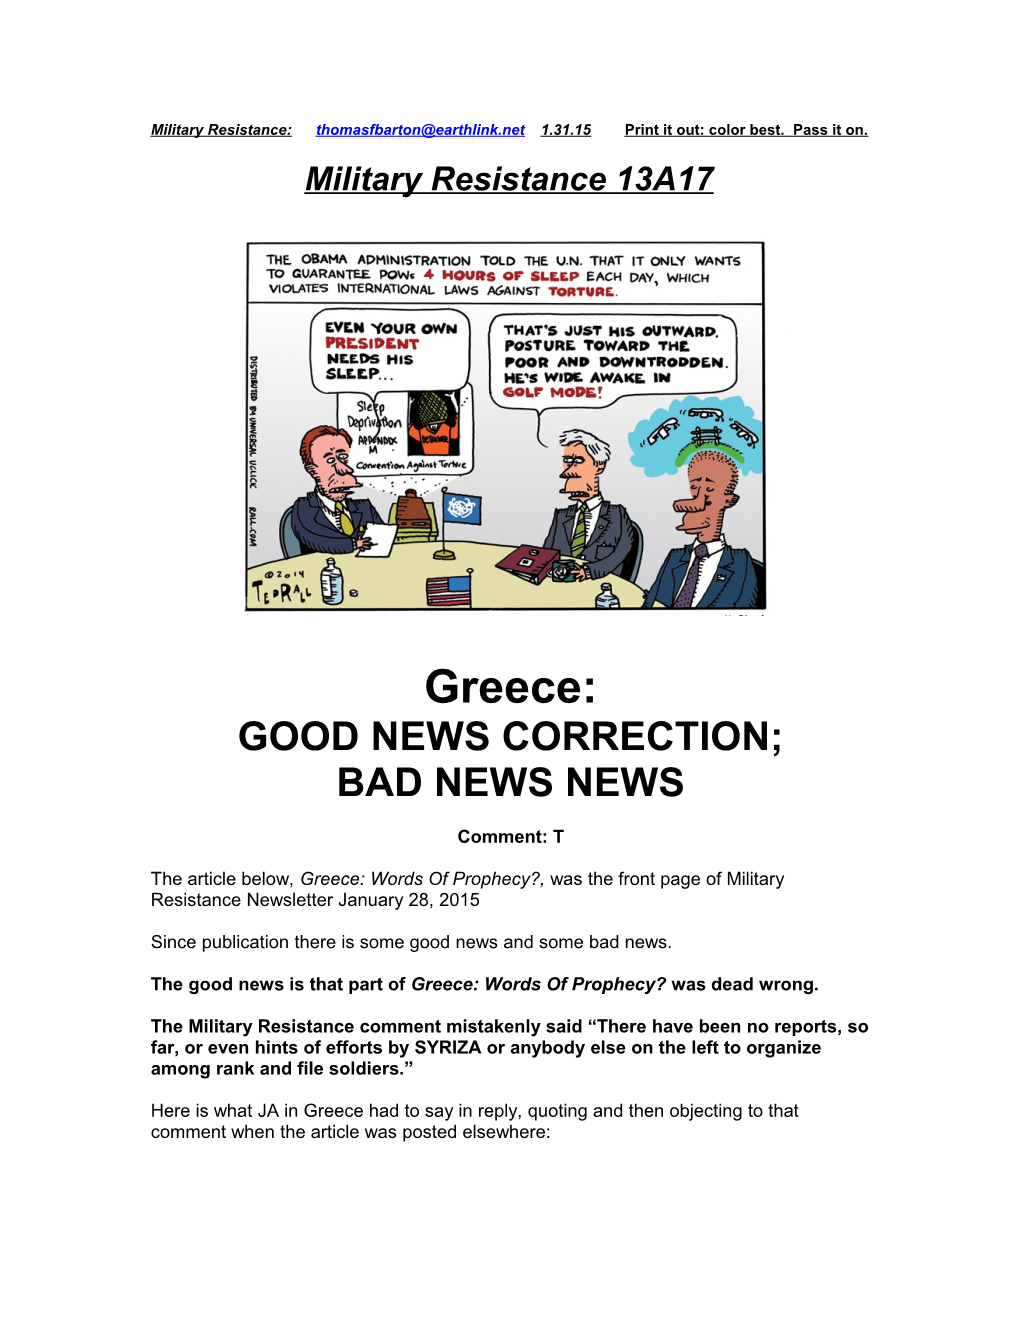 Military Resistance 13A17